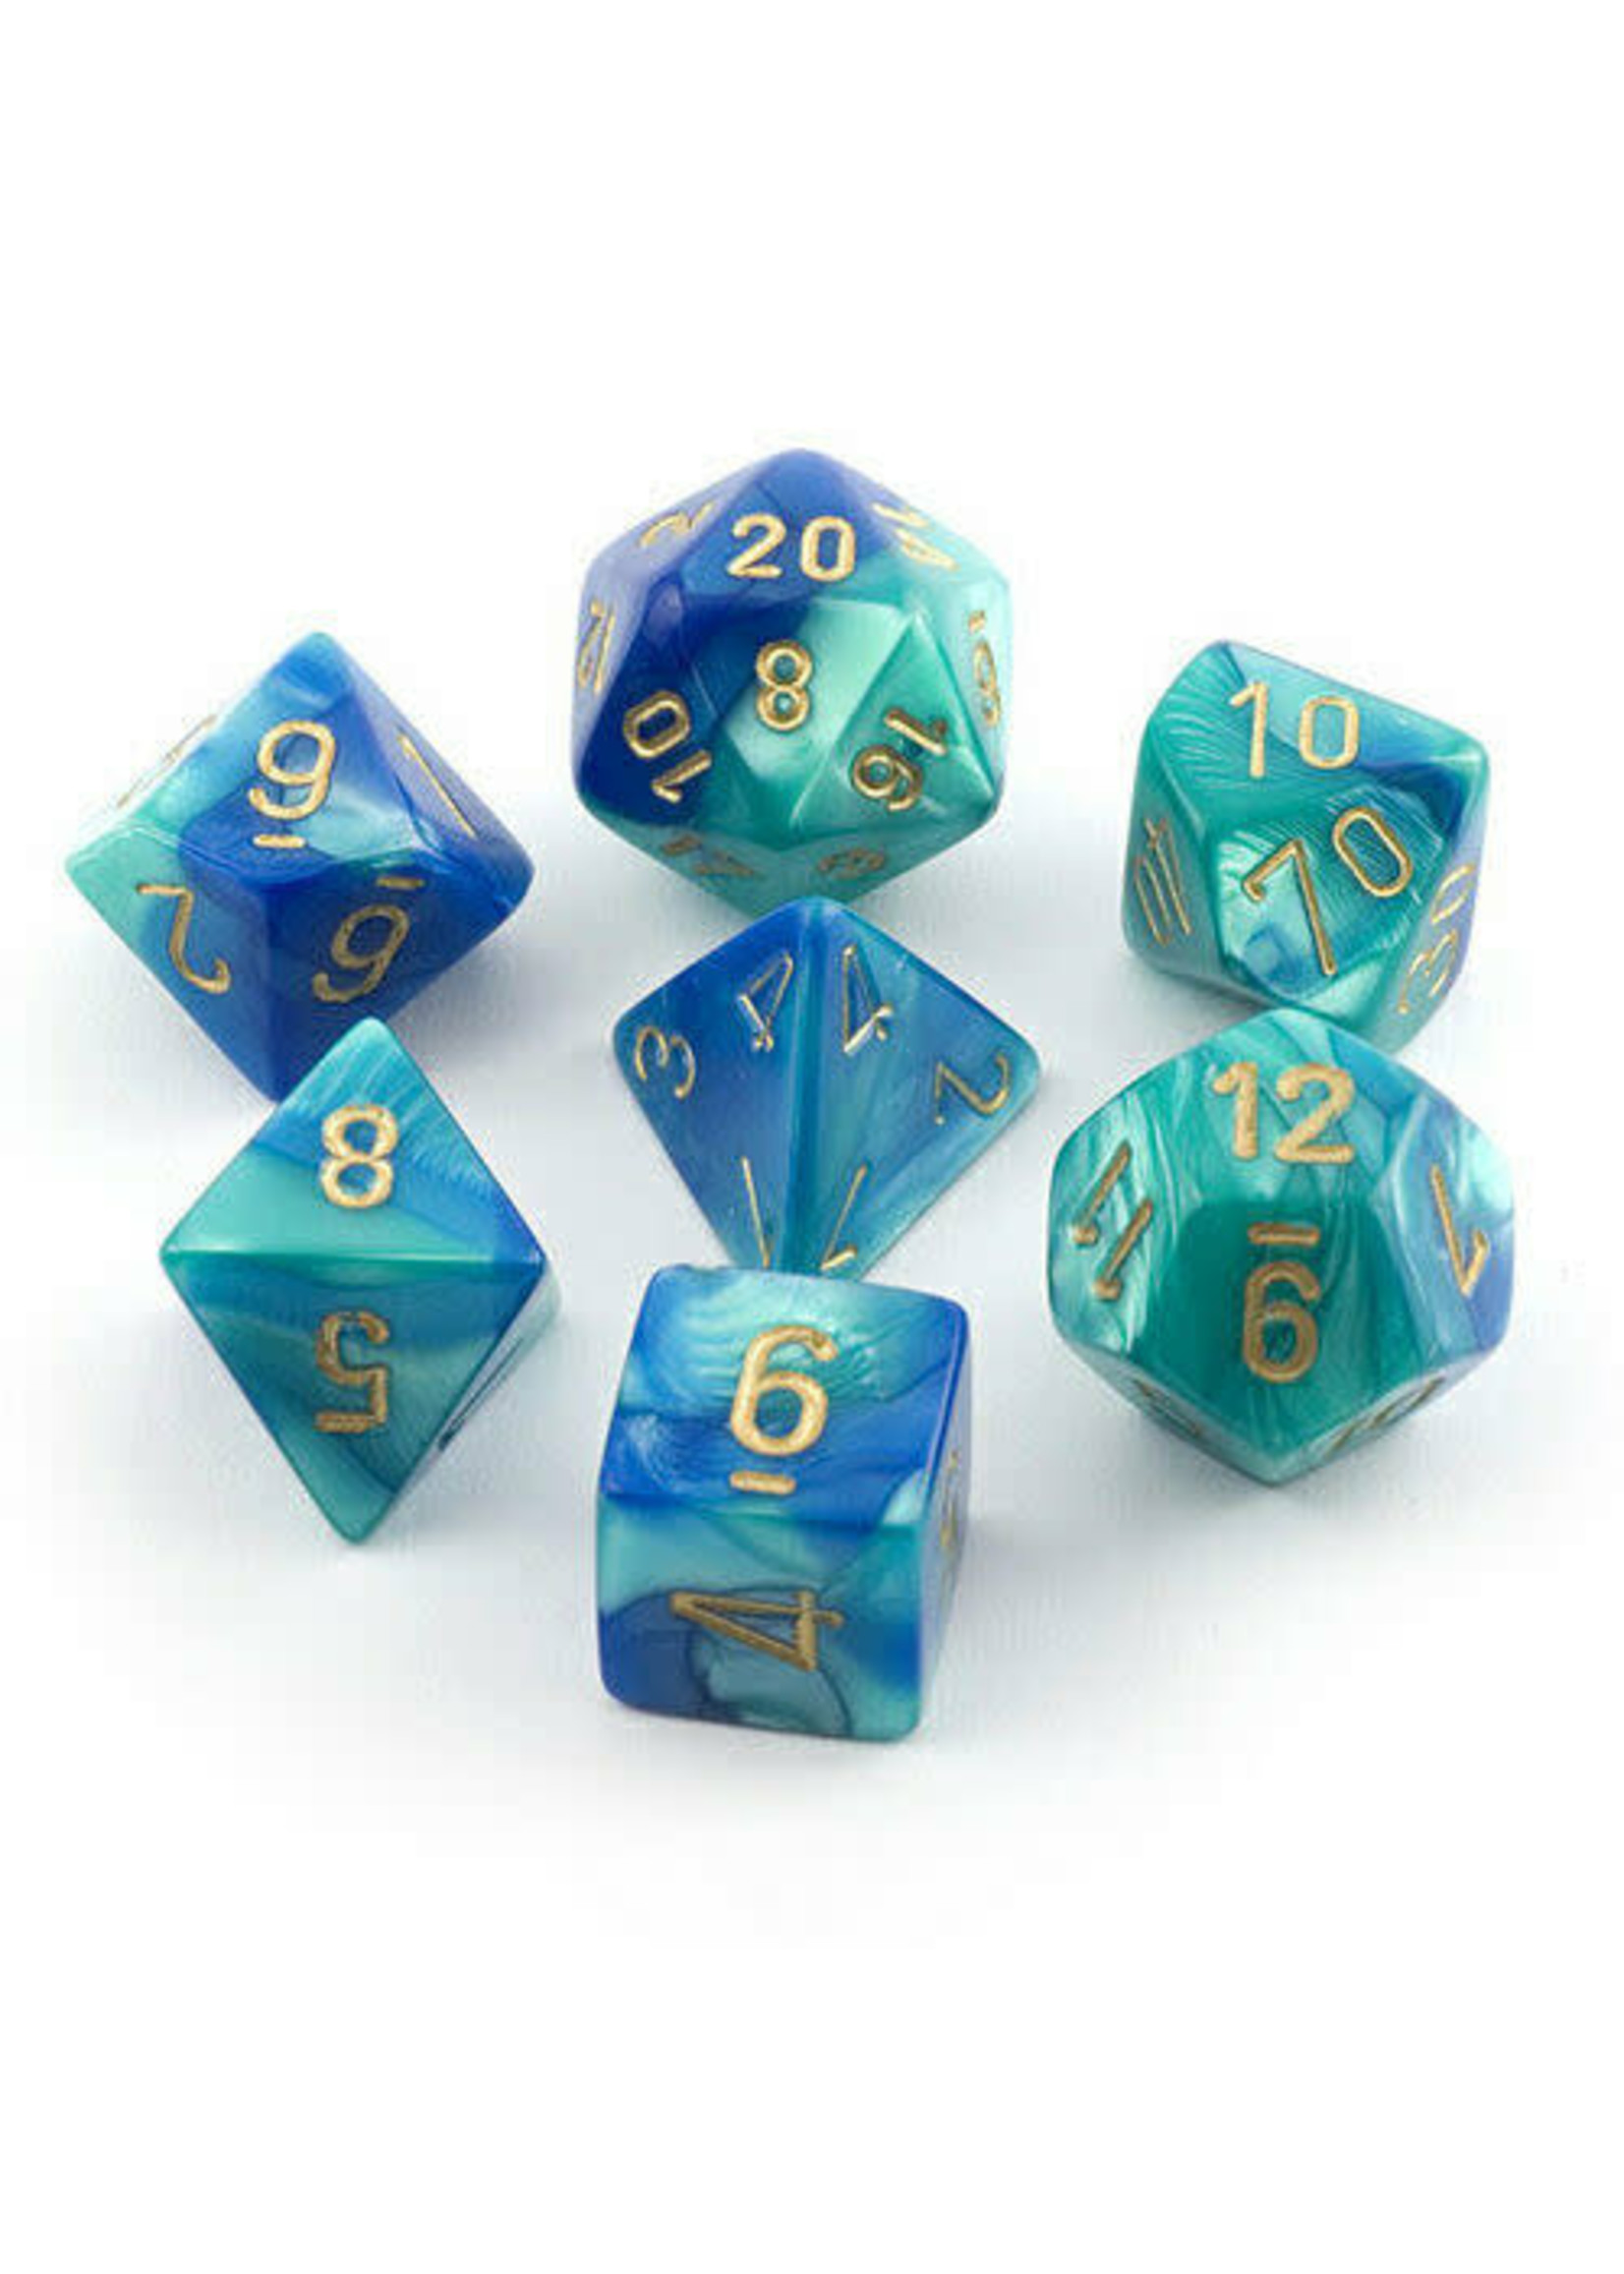 Chessex Gemini Poly 7 set: Blue & Teal w/ Gold